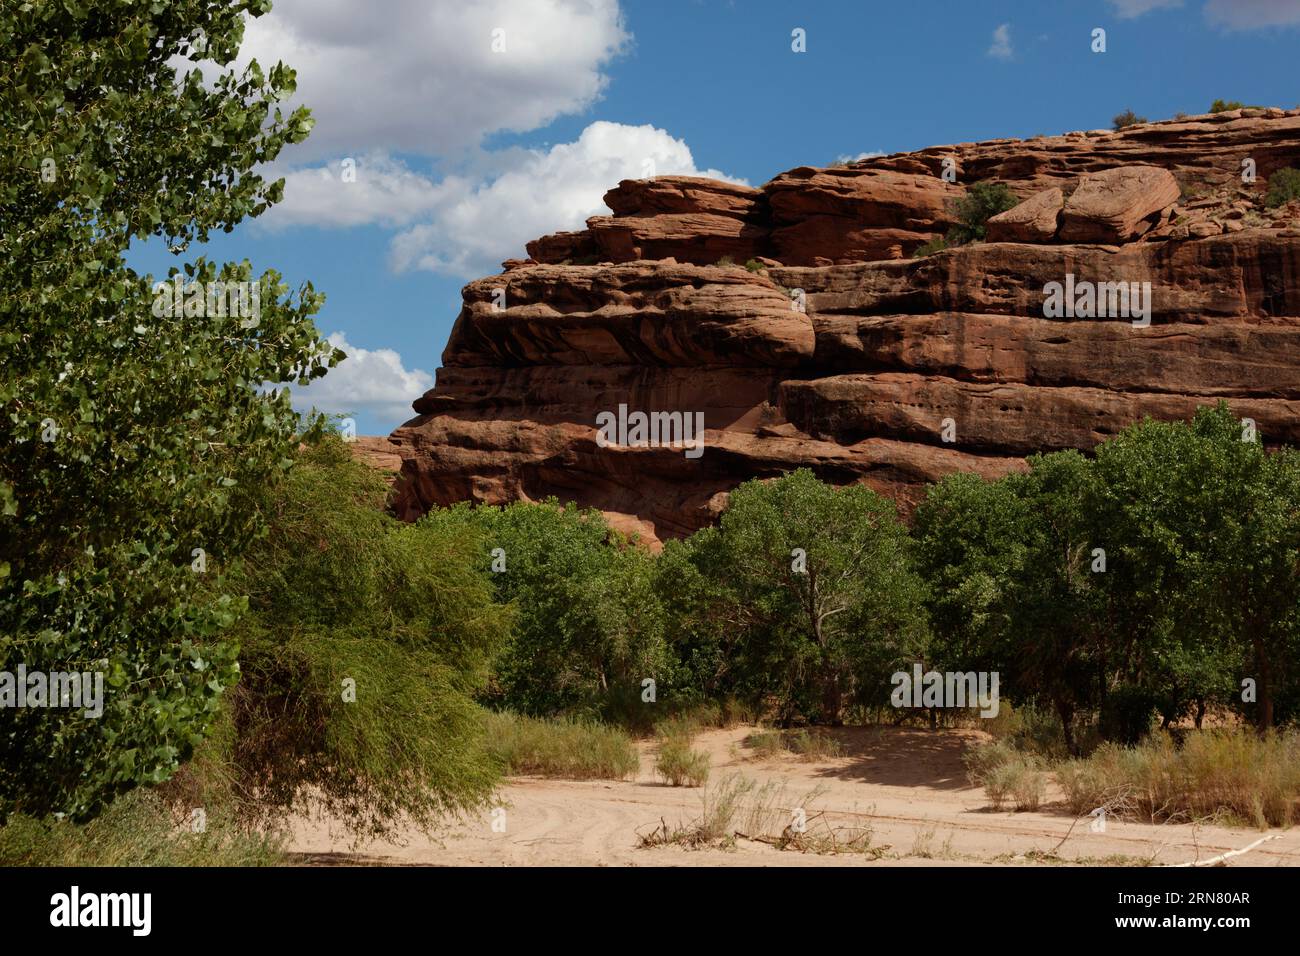 Landscape of sculpted rock formation as seen from the bottom of Canyon De Chelly National Monument - Navajo Indian Reservation, Arizona Stock Photo